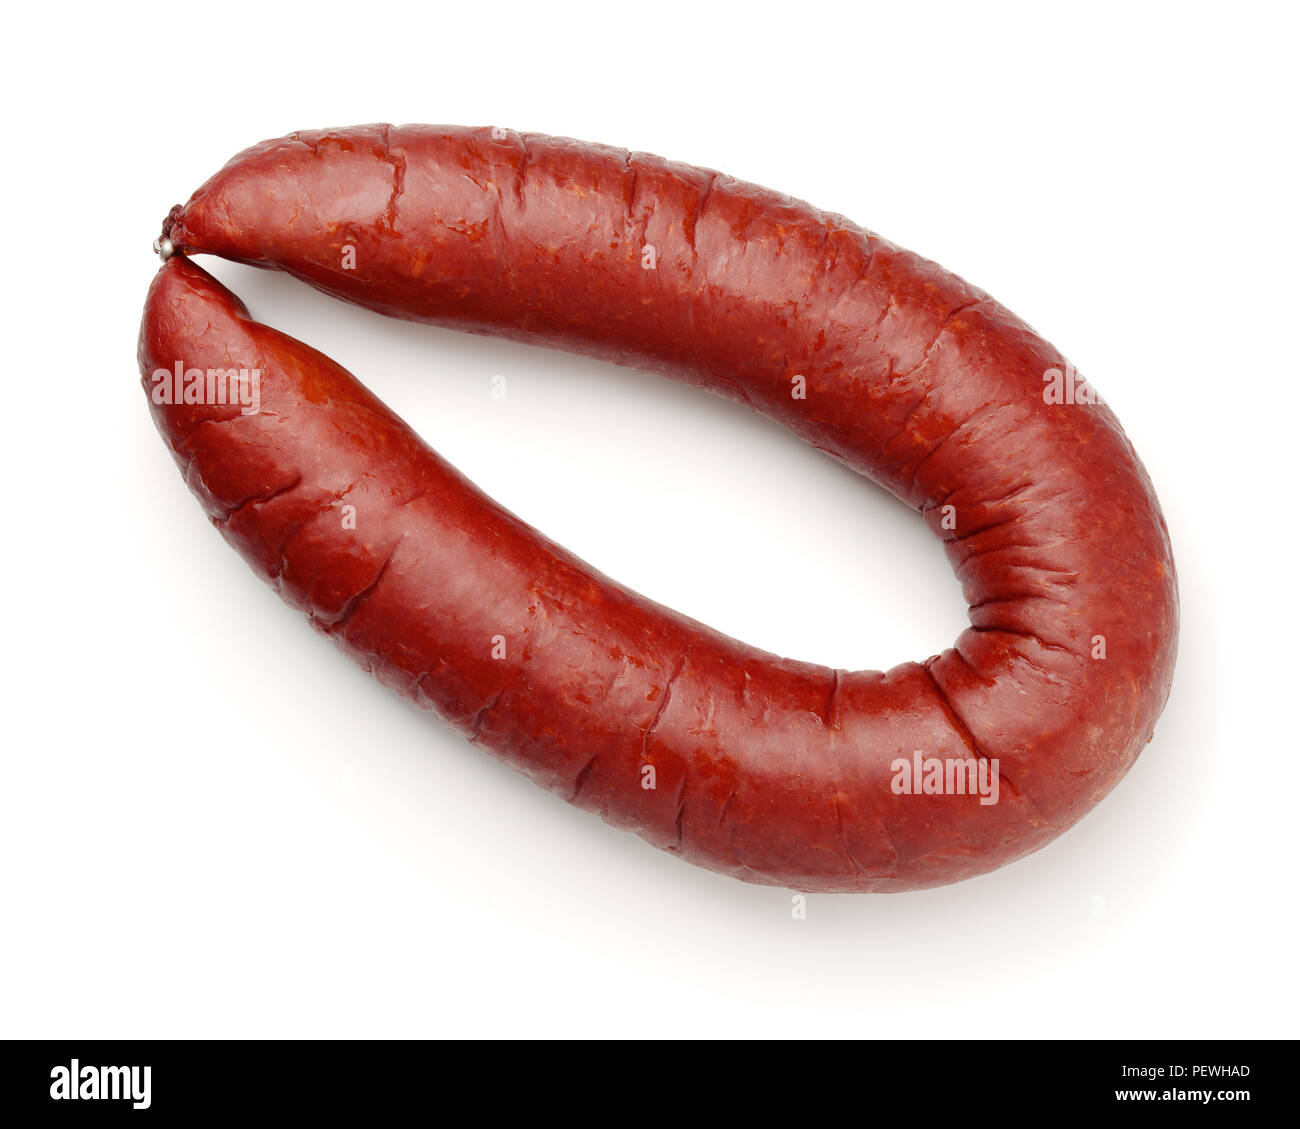 Top view of smoked beef sausage isolated on white Stock Photo